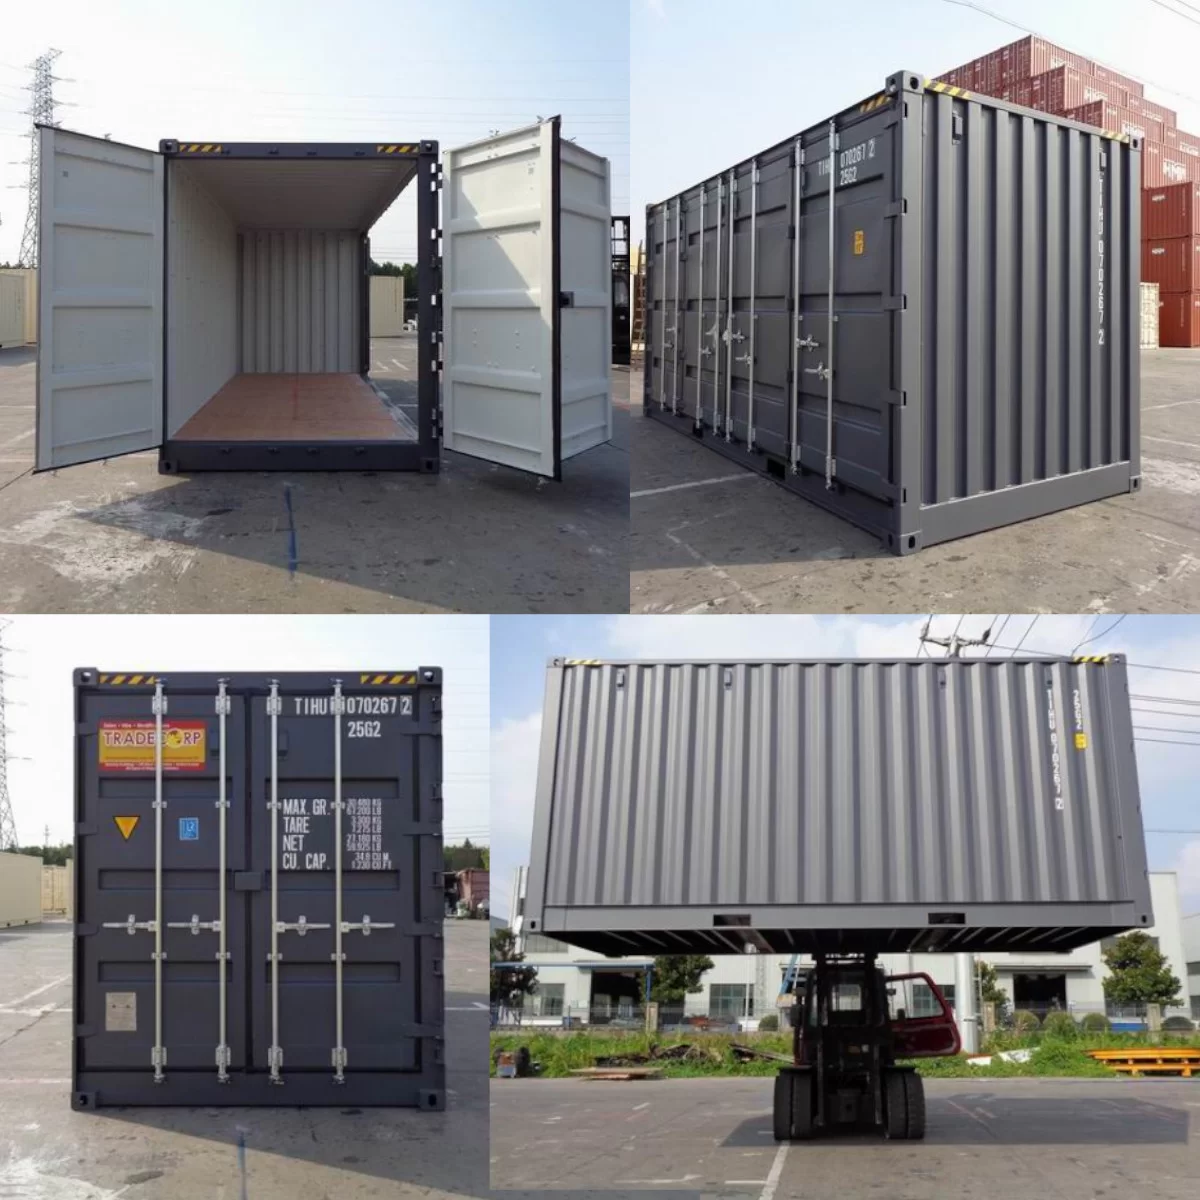 Shipping containers for sale in New York City